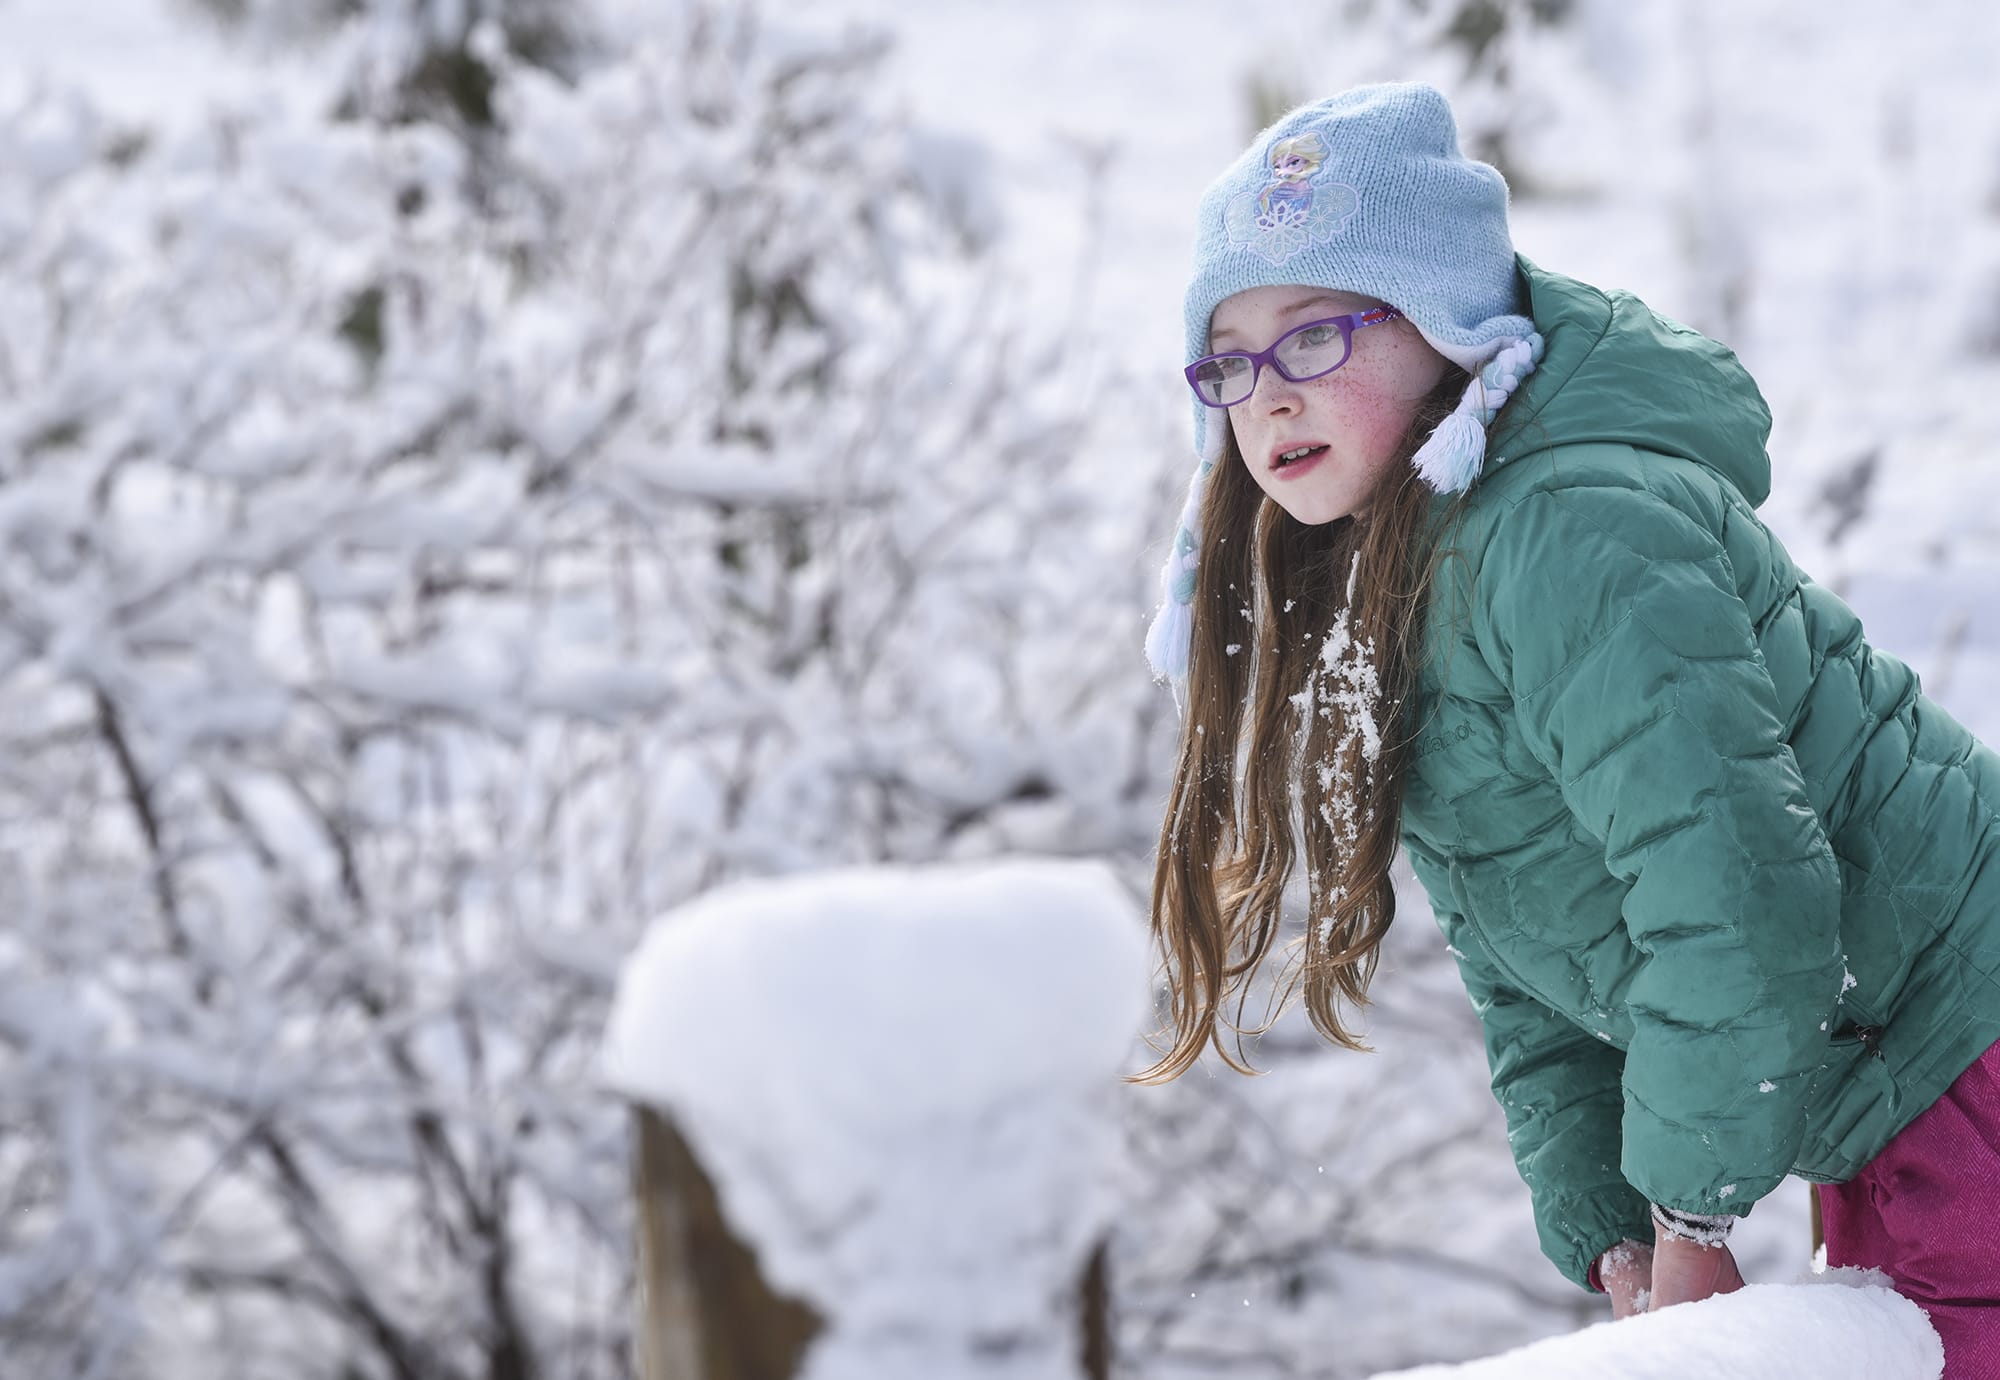 Eden Stahley, 9, leans over a snow-covered fence to look into a marsh at Mount Vista near WSU Vancouver, Monday morning, February 19, 2018. Stahley and her two sisters were enjoying the few inches of snow by sledding together on a hill near their home.